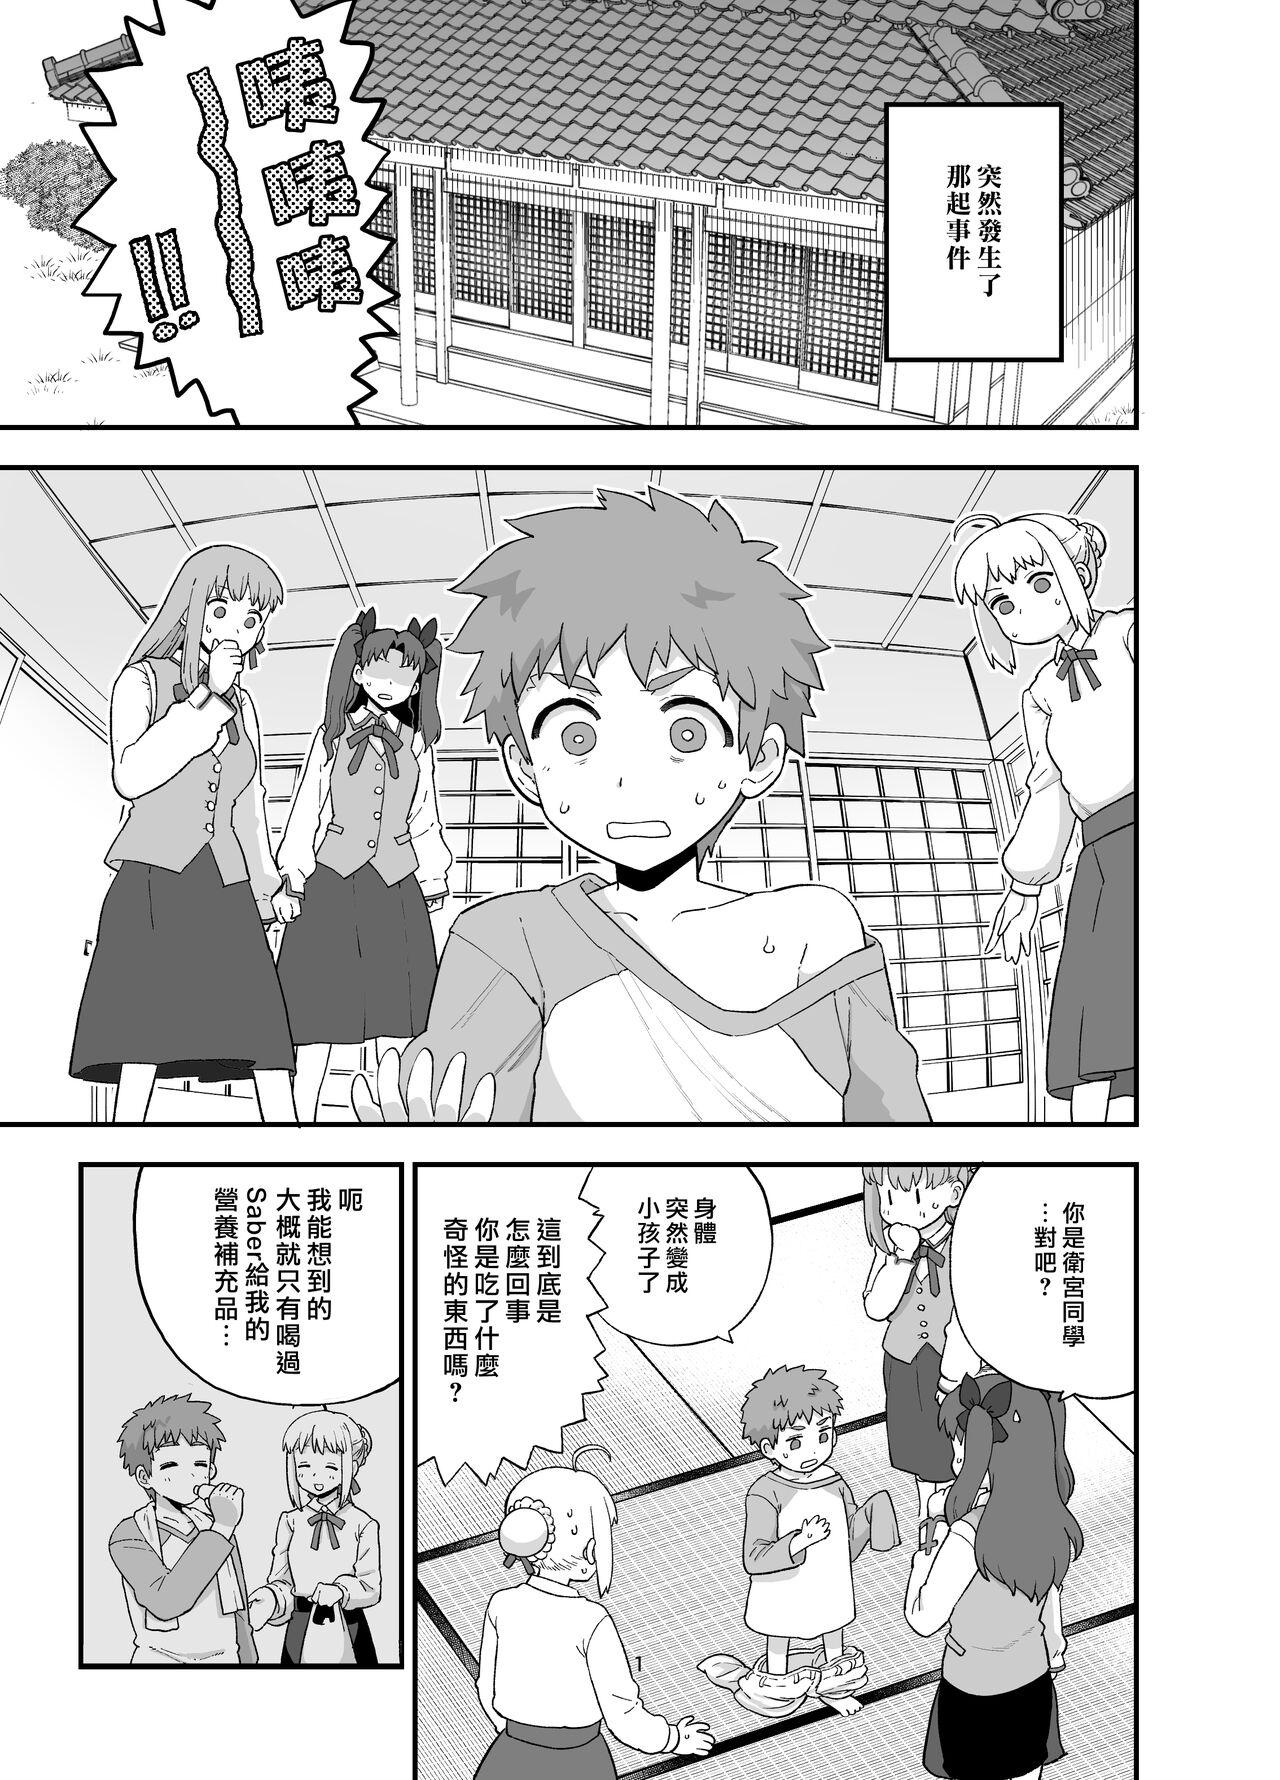 Dorm Rider-san to Orusuban - Fate stay night Hot Naked Girl - Page 4